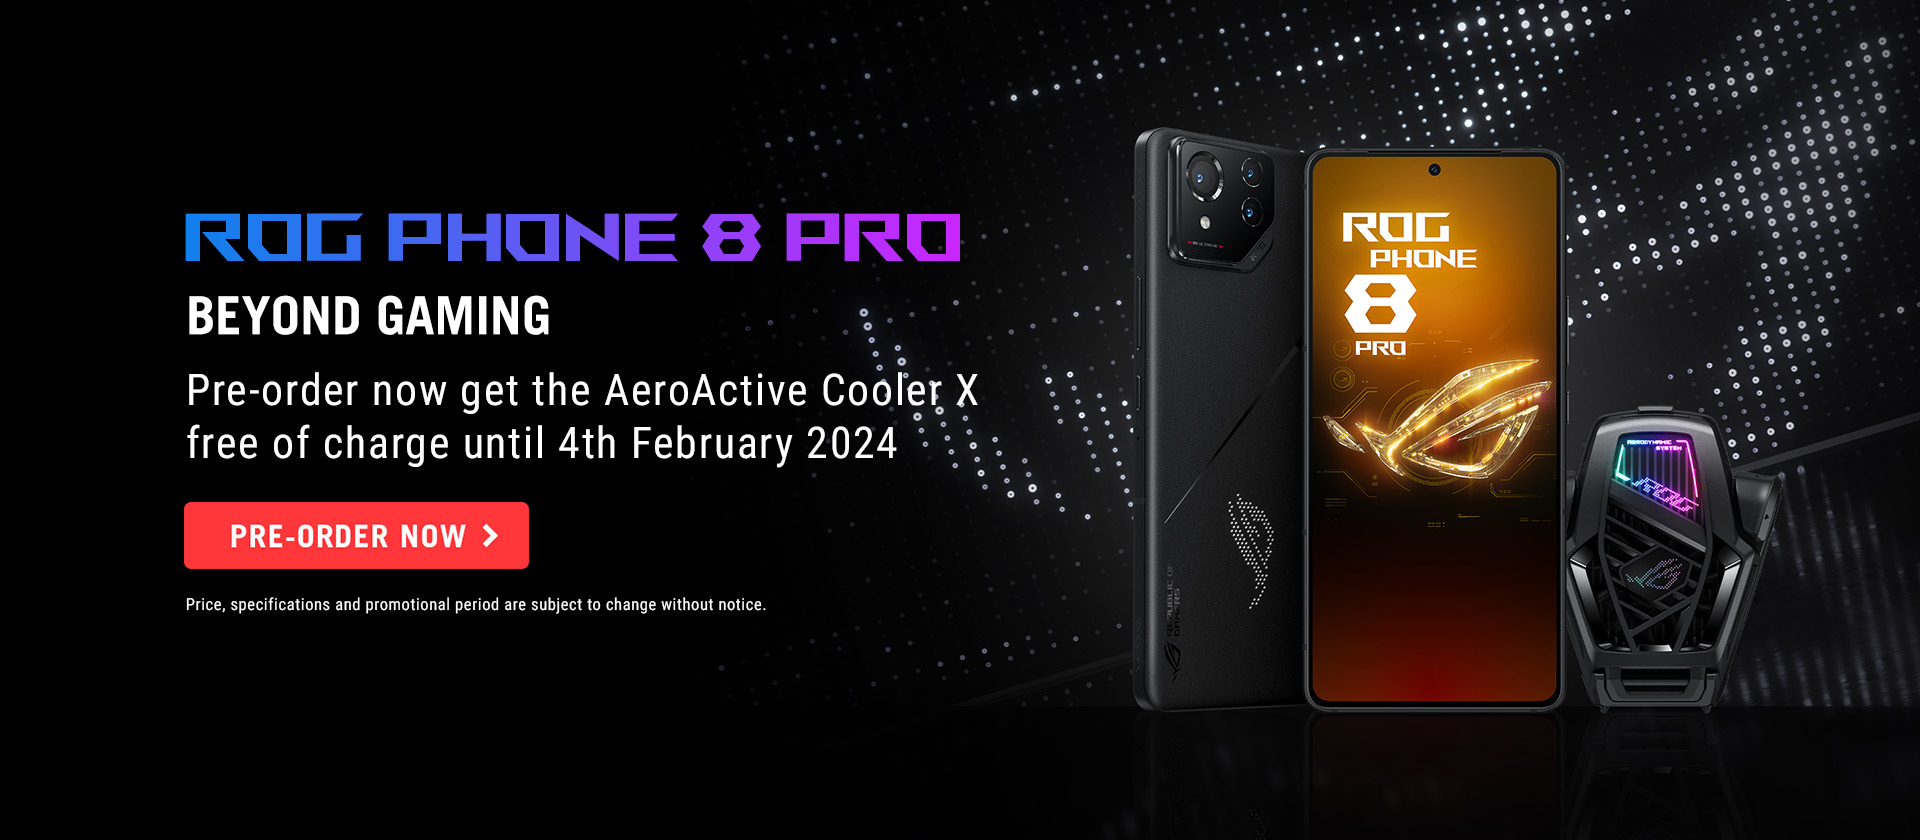 Asus announces more compact ROG Phone 8 Pro gaming phone